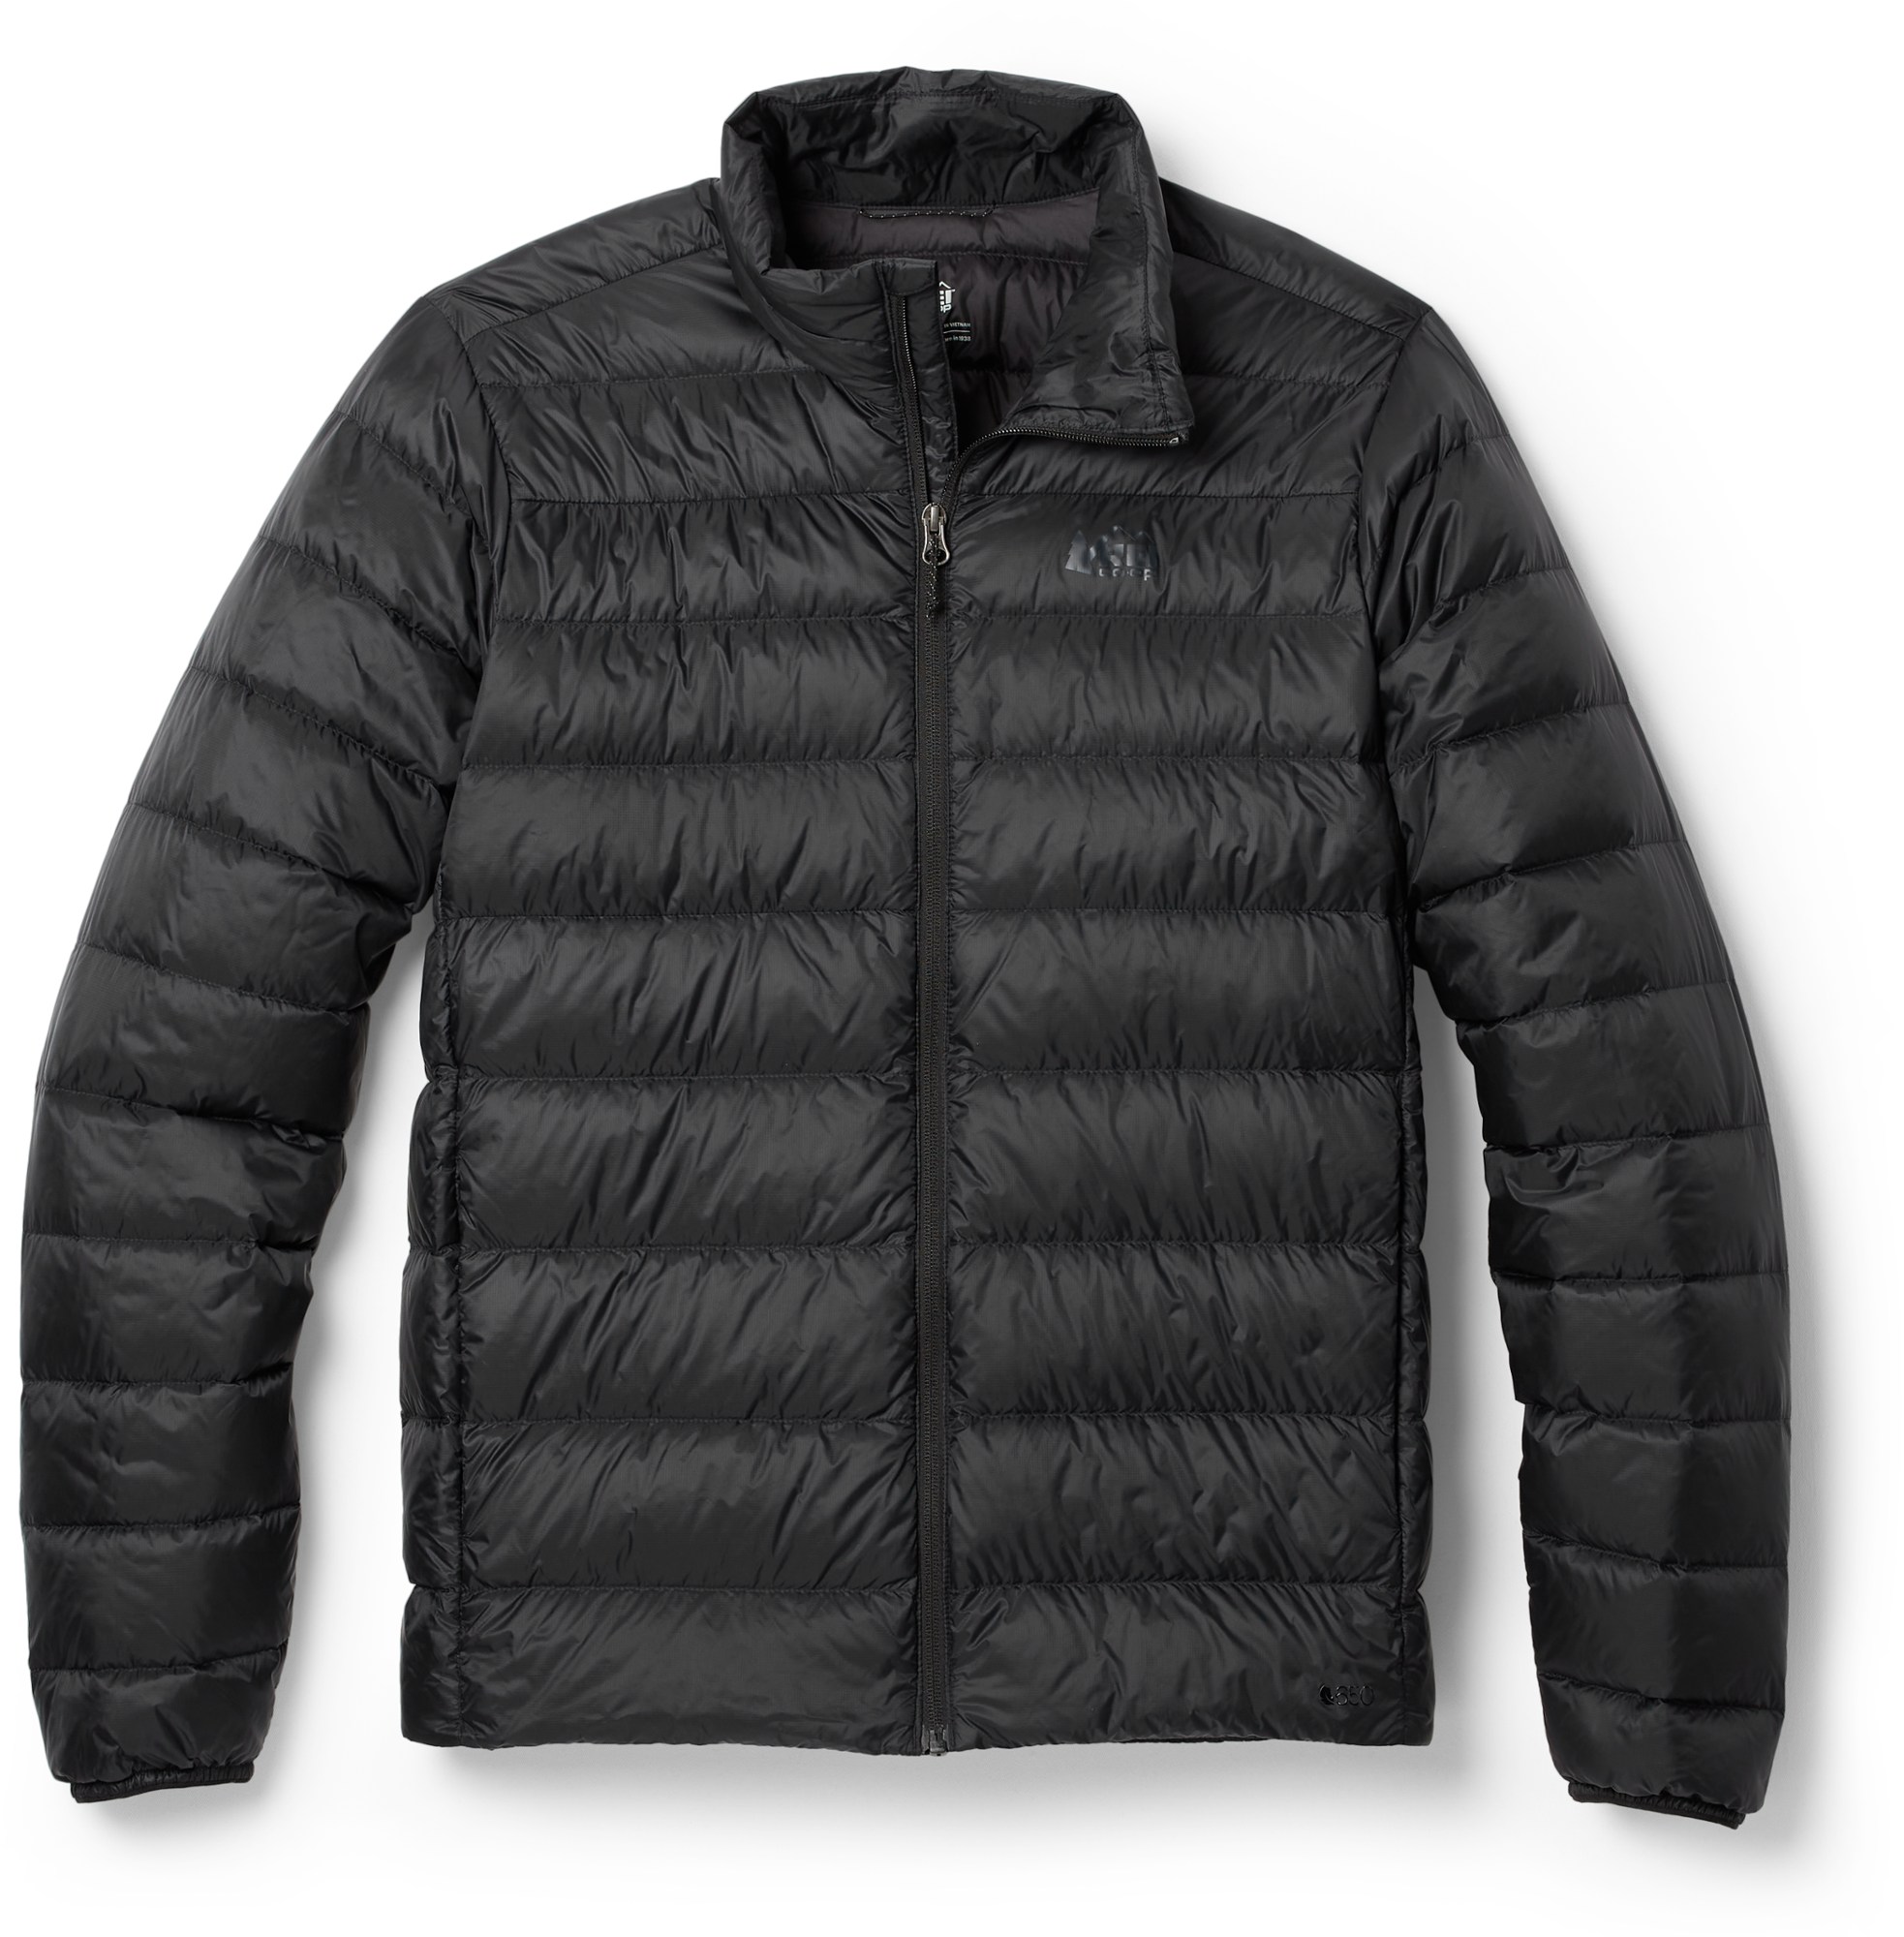 REI Co-op 50% Off: Men's & Women's 650 Down Jacket (various colors) $64.50, Men's & Women's 650 Down Vest $49.90 + Free Store Pickup or Free Shipping on $60+